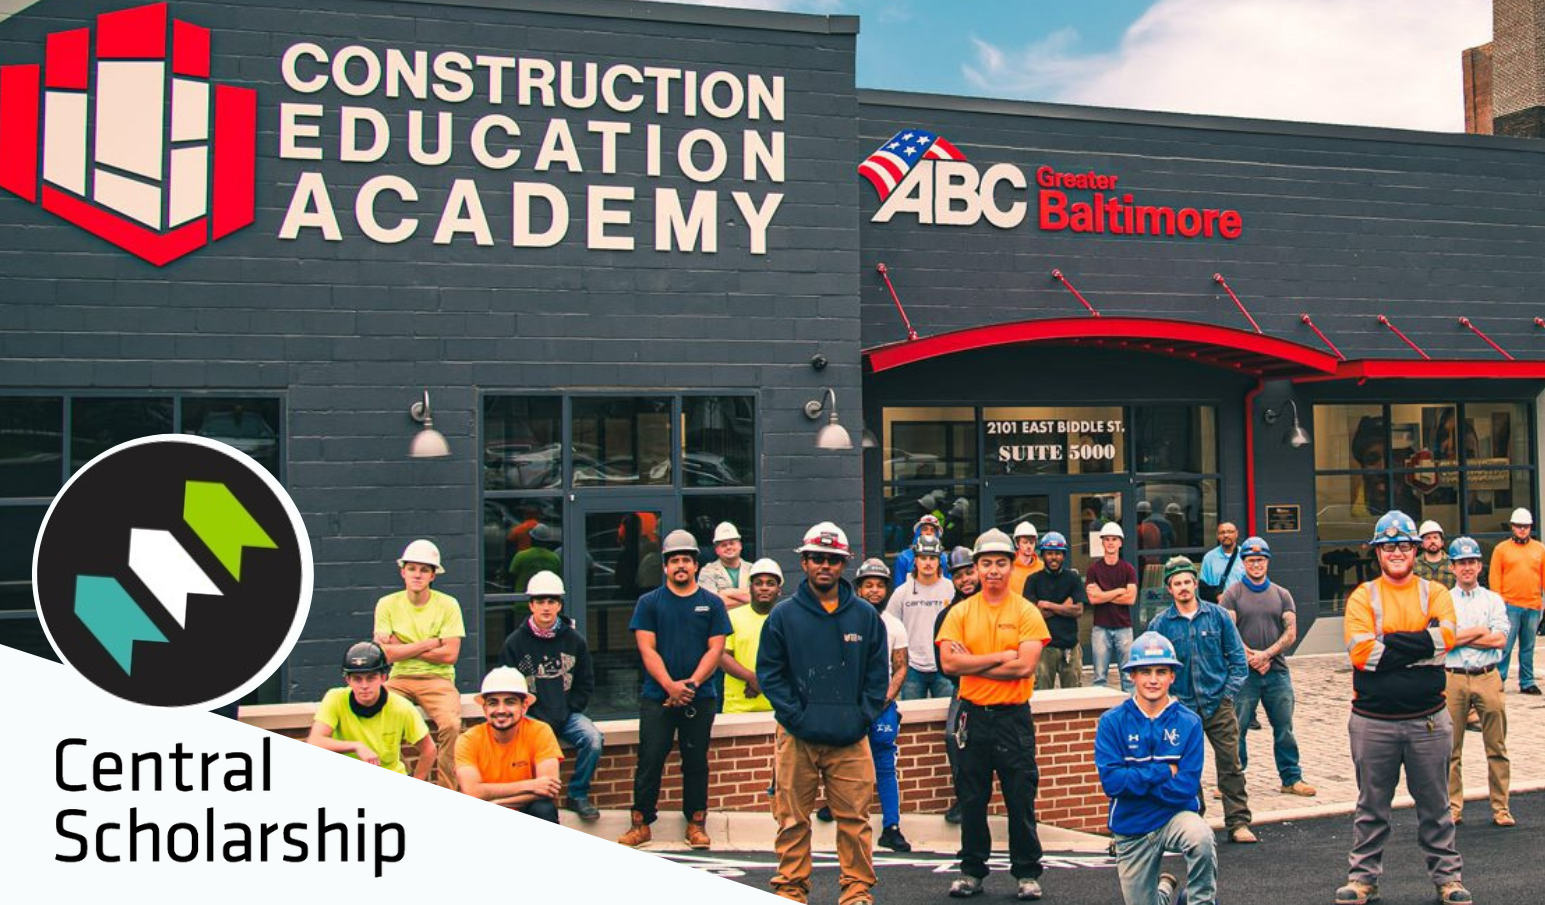 Grants available for Construction Education Academy students